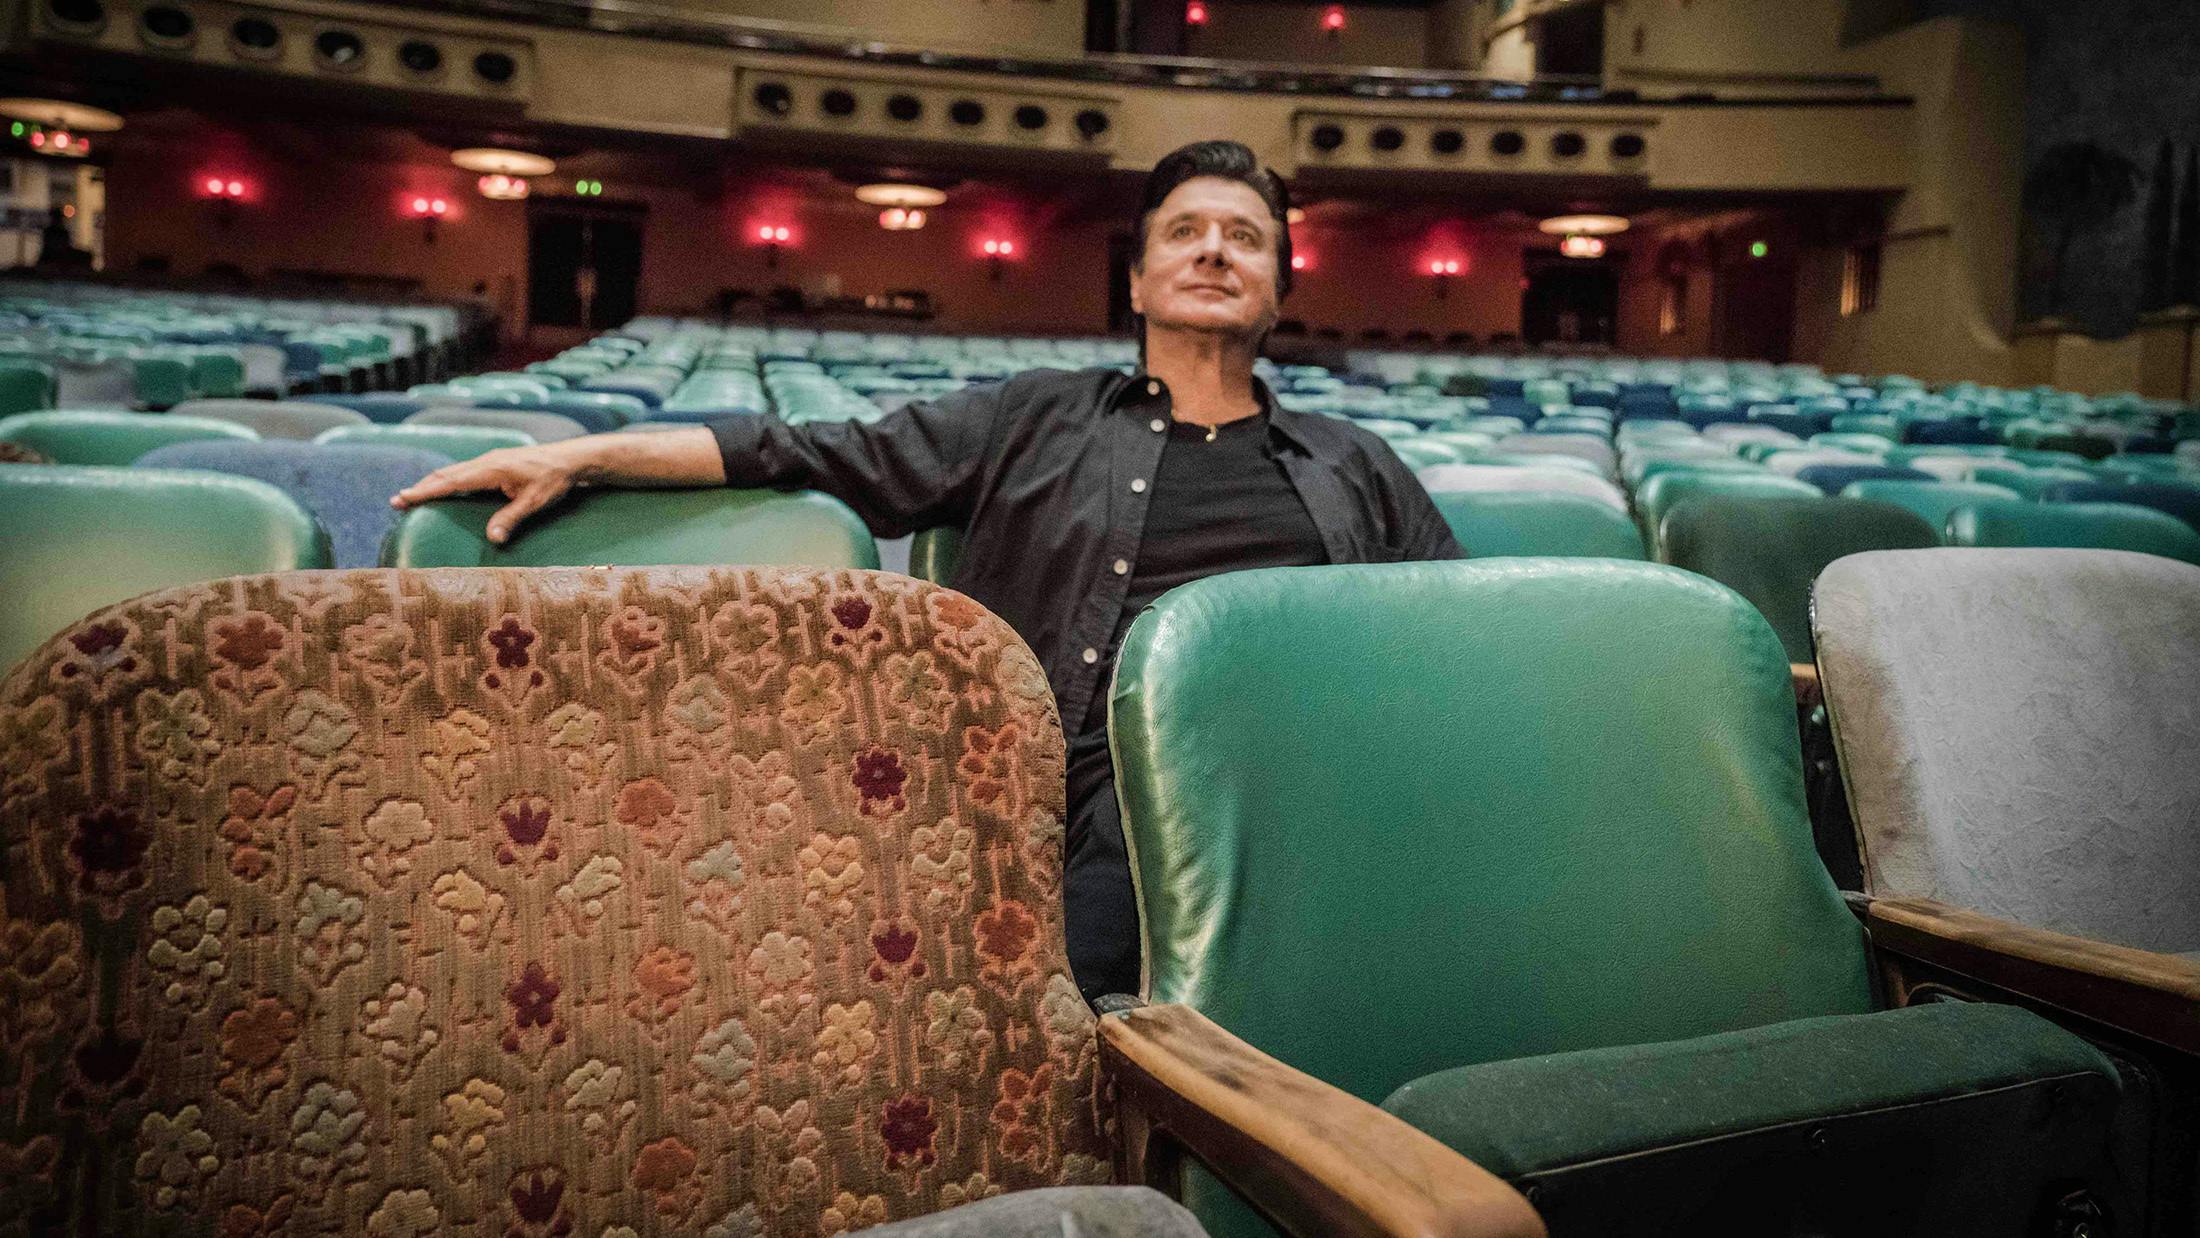 Don't Stop Believin': Steve Perry On Fame, Journey And THAT Song